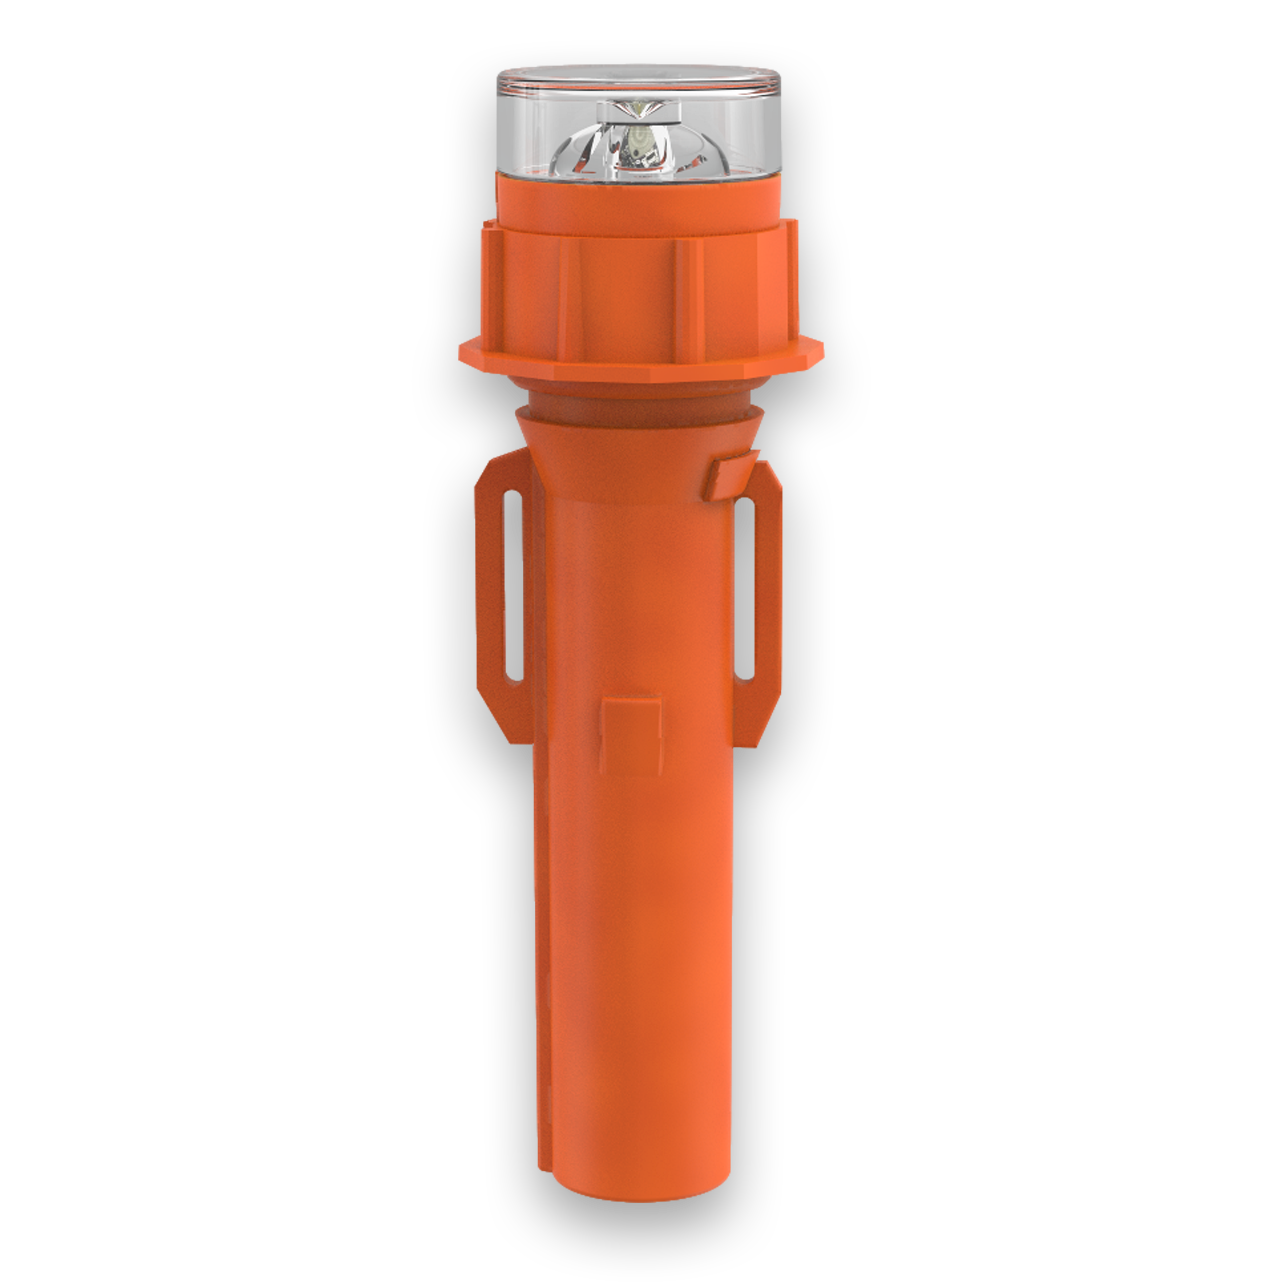 ThriftyFlare™ Cone with Snow Dome #6103 <br>(For Standard Traffic Cones)